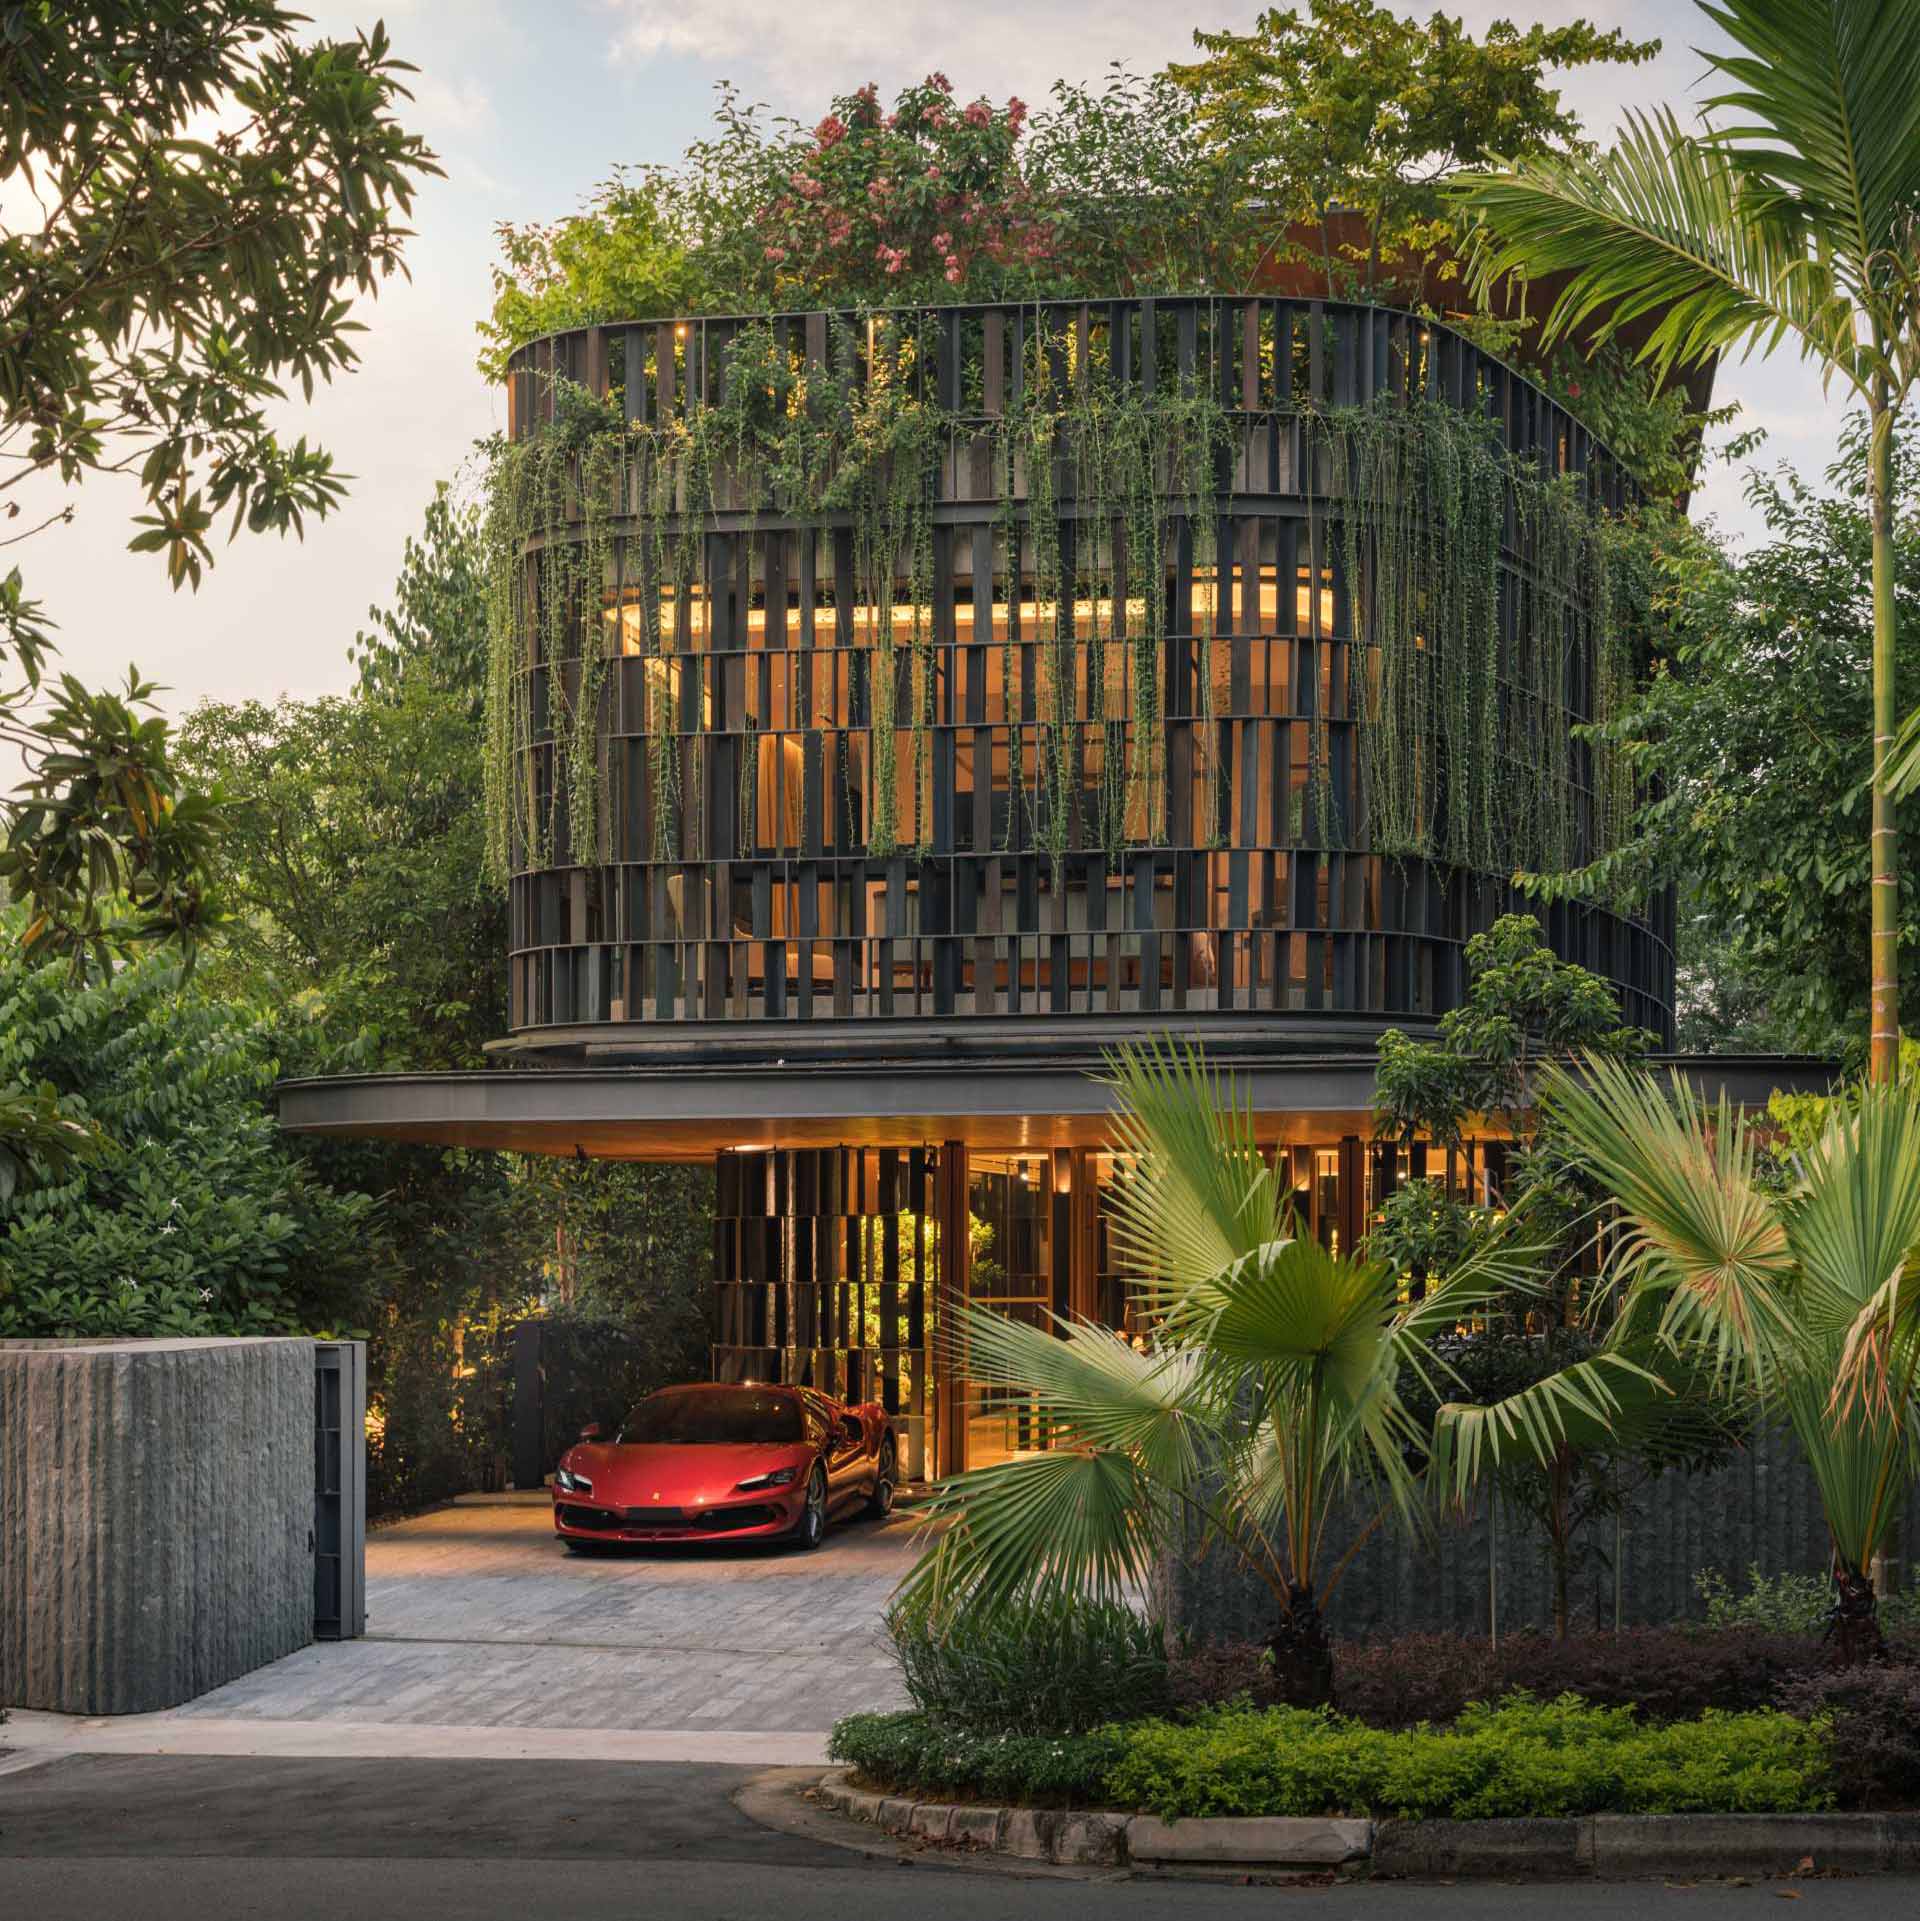 A modern house in Singapore that has plants and shade screens integrated into its design.